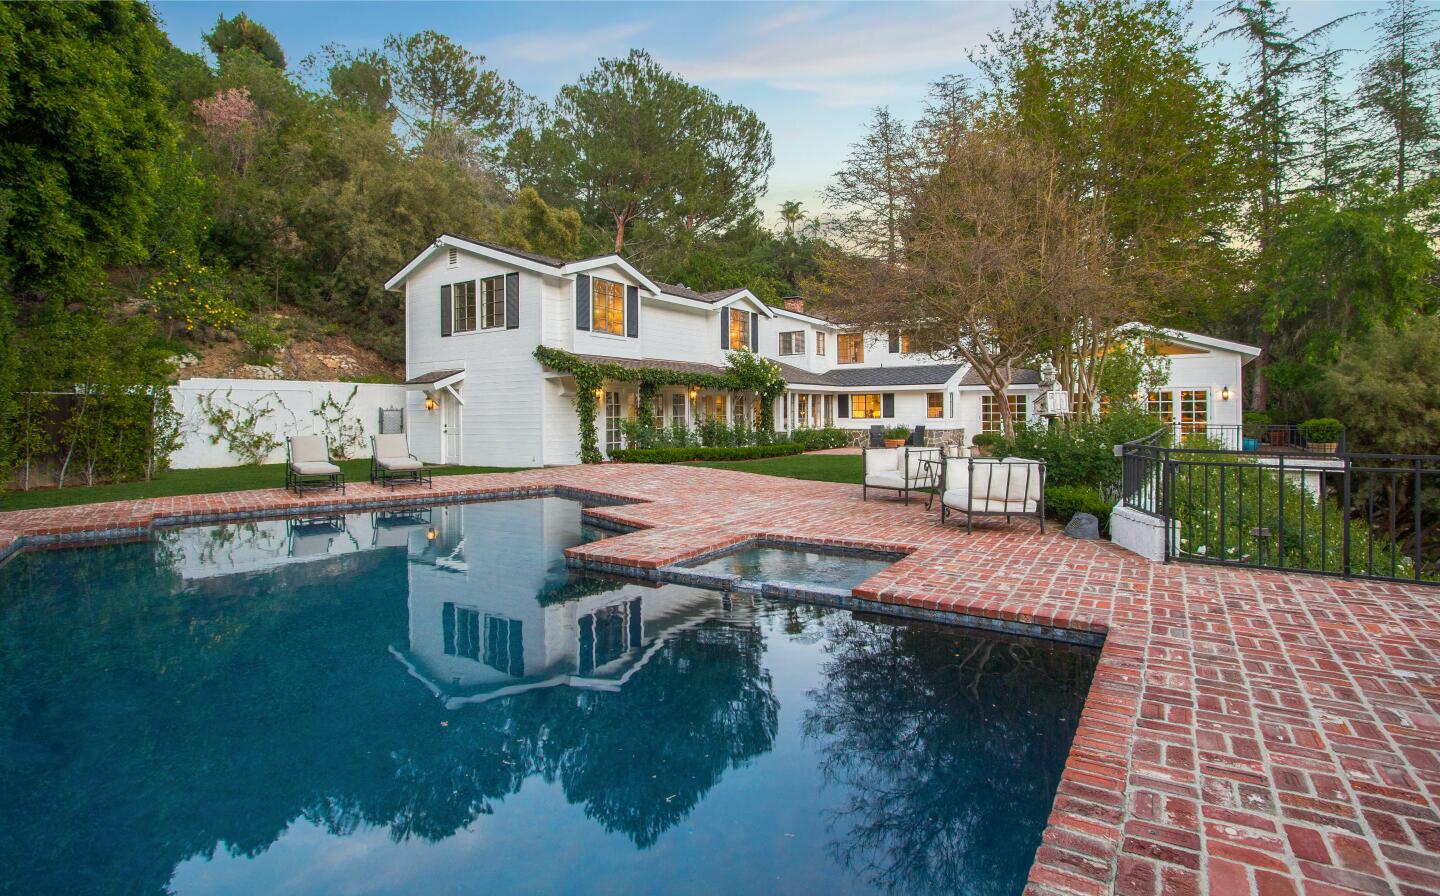 The 1.5-acre spread includes a swimming pool, tennis court and L-shaped home built in the 1970s.